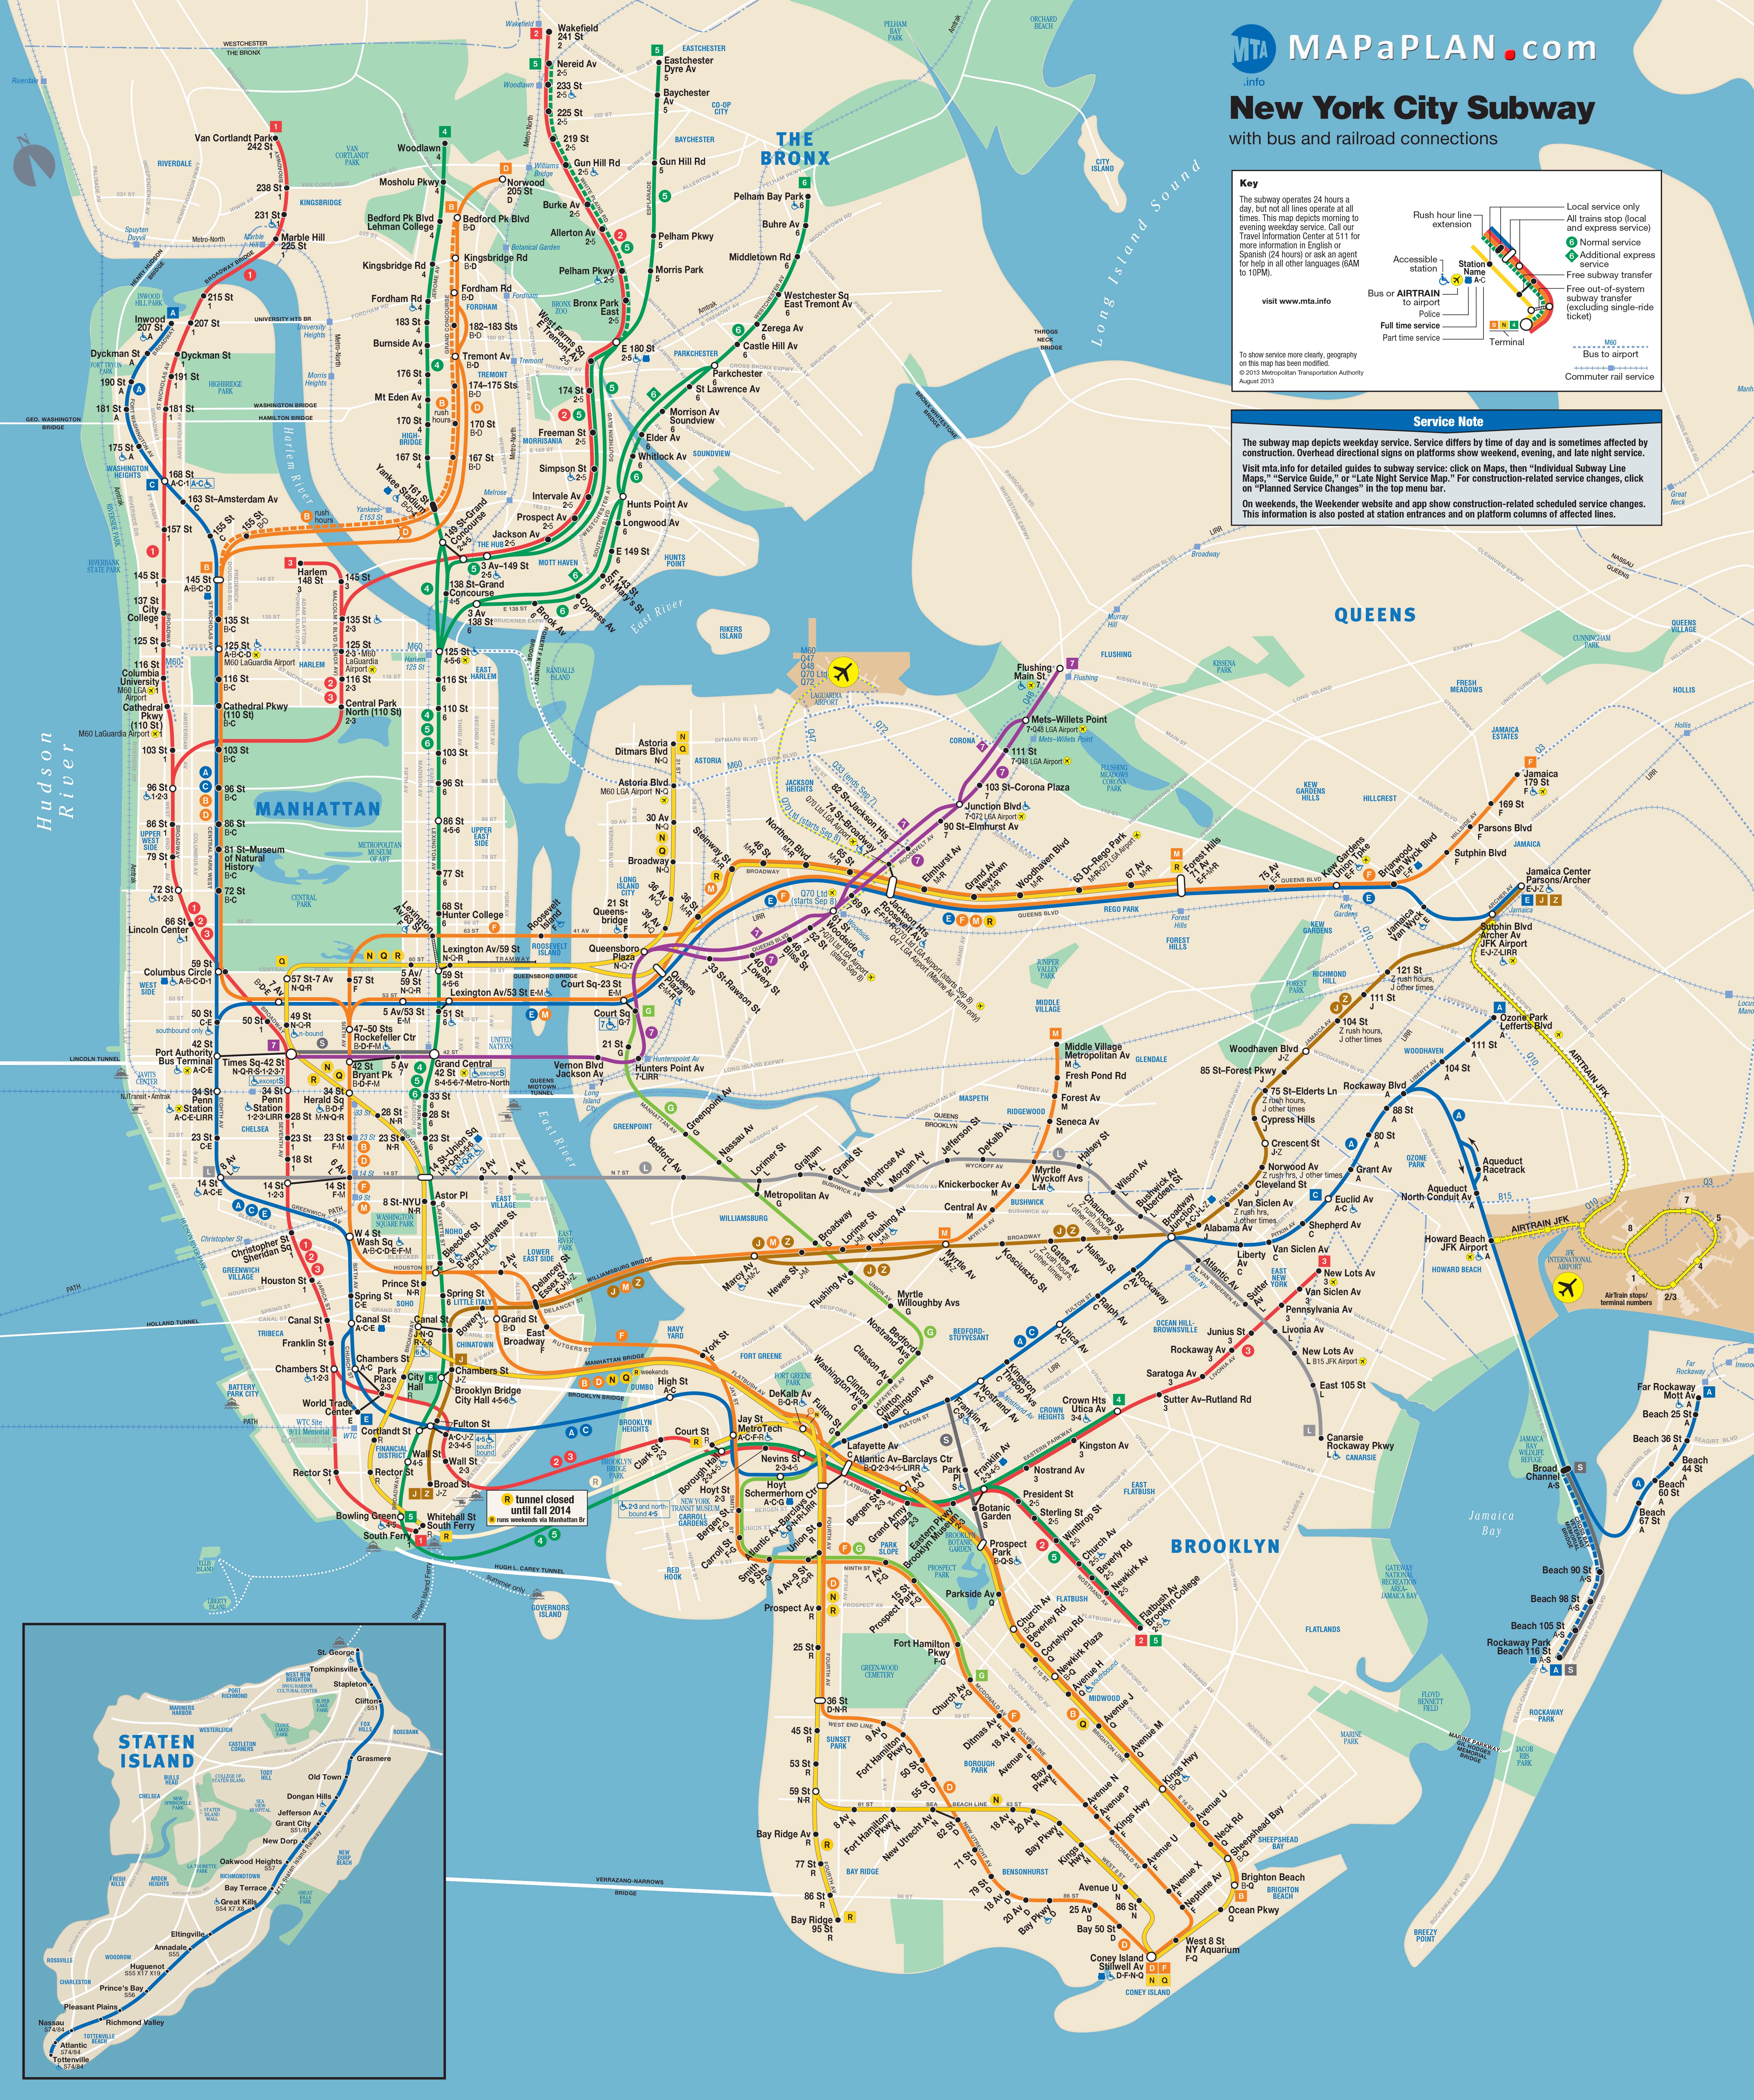 New York City subway (metro) map with bus and railroad connections